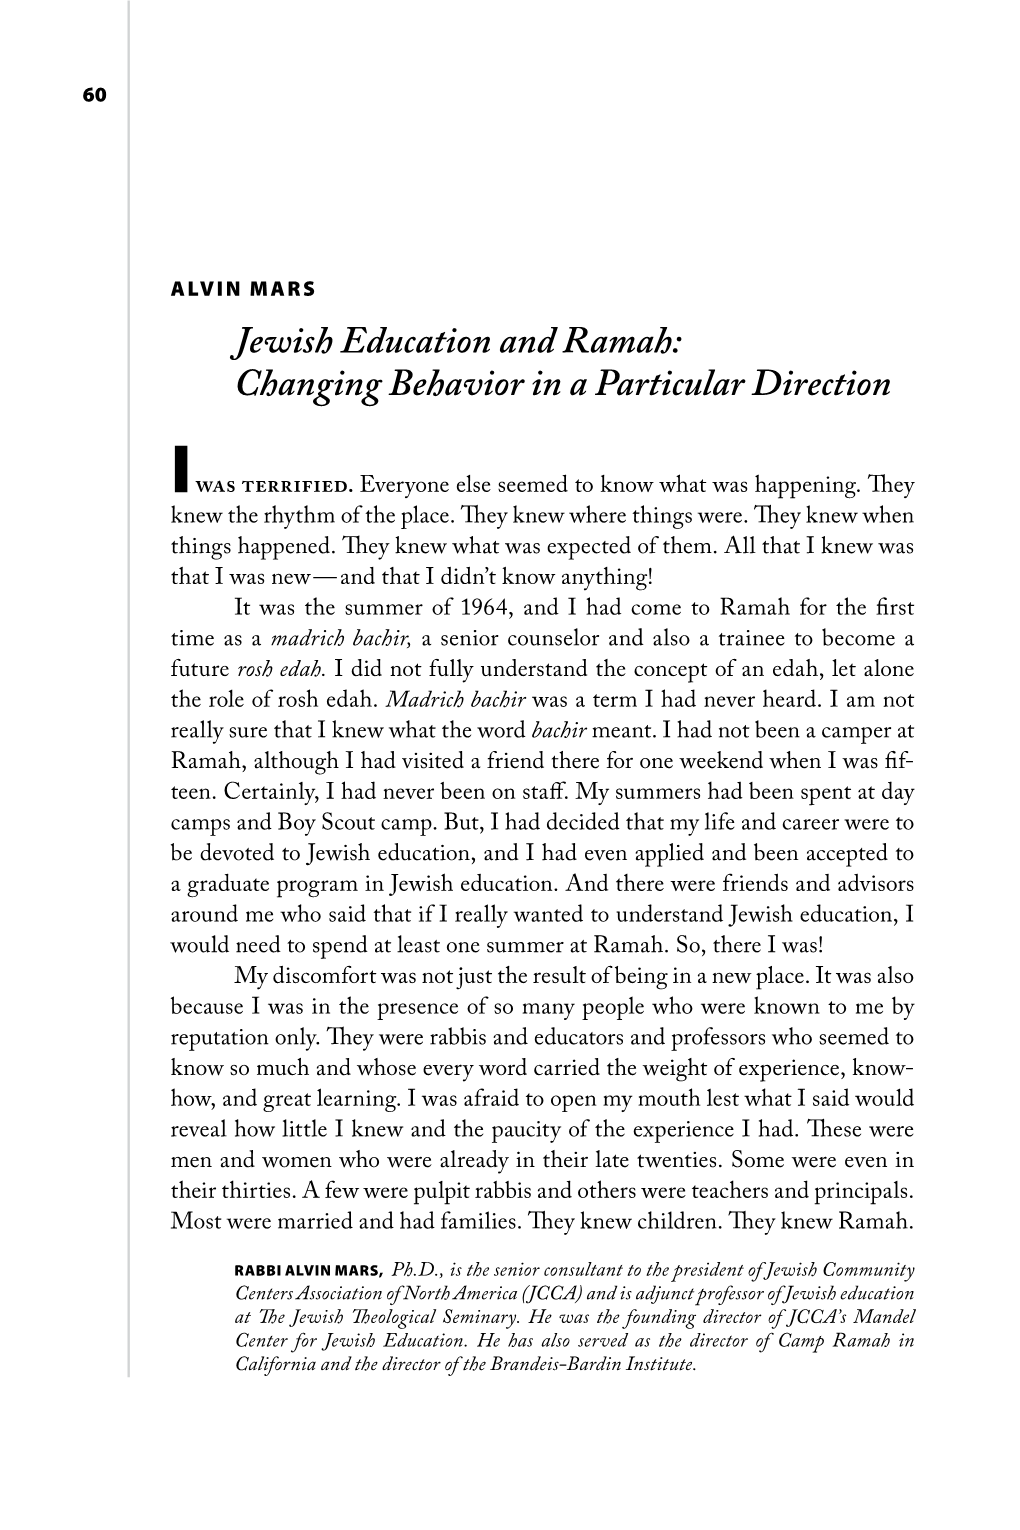 Jewish Education and Ramah: Changing Behavior in a Particular Direction